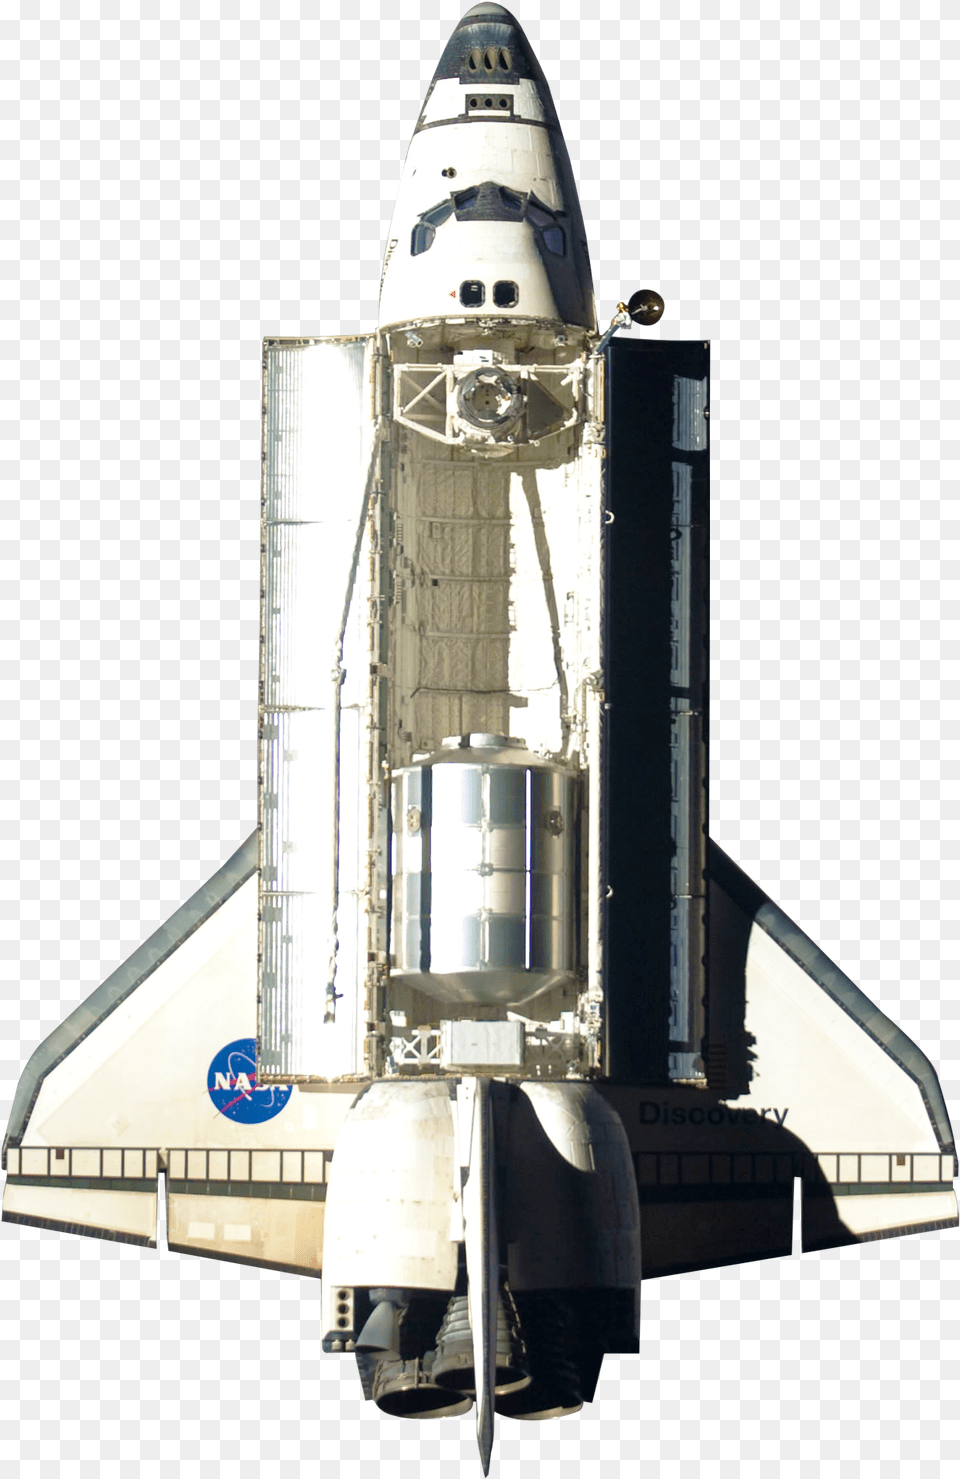 Spaceship 1432x2010 Pixels Display Picture V06 Space Rocket Rocket, Aircraft, Space Shuttle, Transportation, Vehicle Png